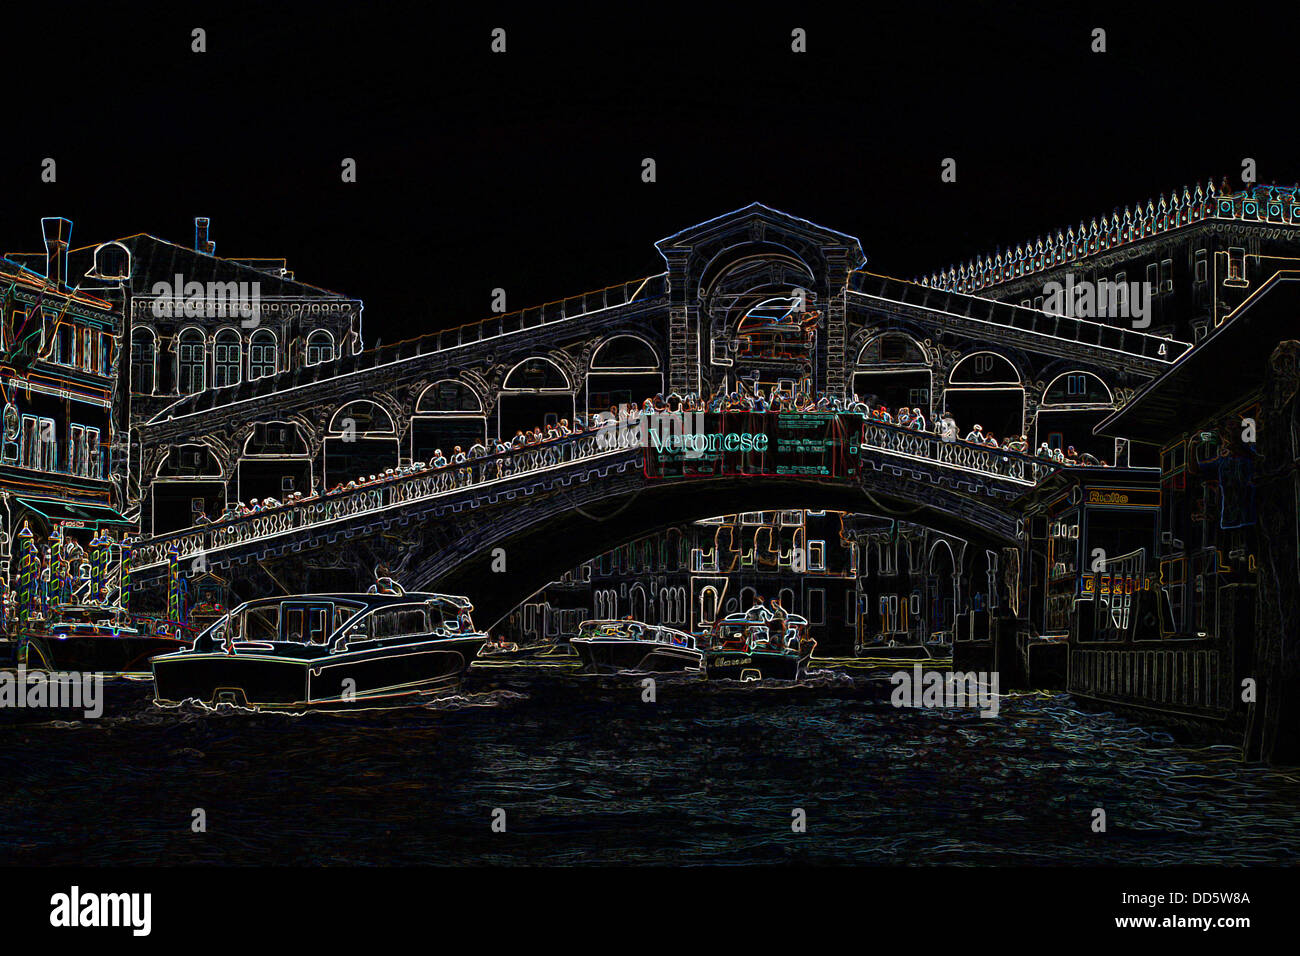 A surreal coloured etching like image of the Rialto Bridge in Venice. Stock Photo